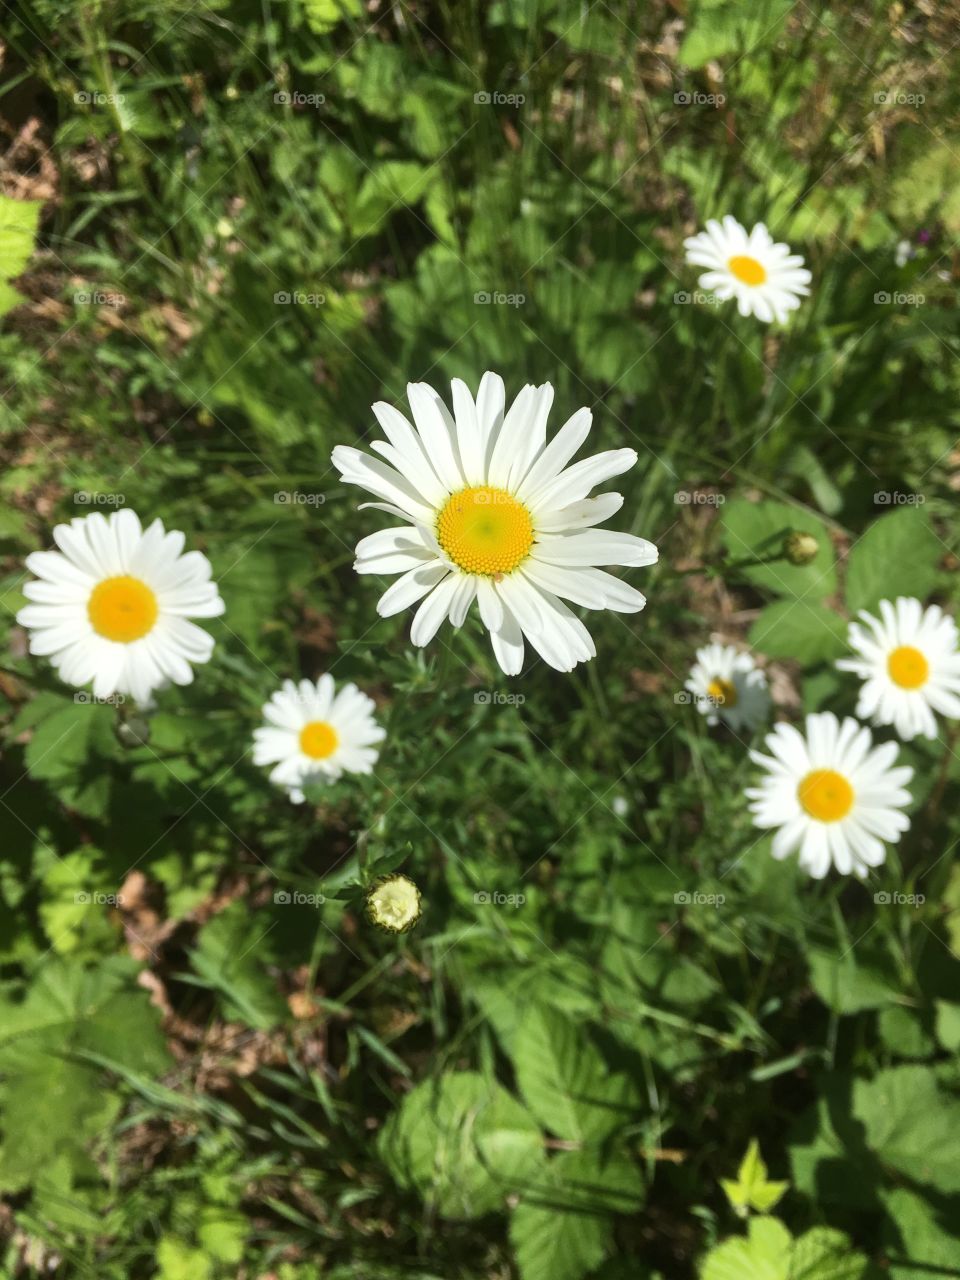 High angle view of a daisy flower growing on plant